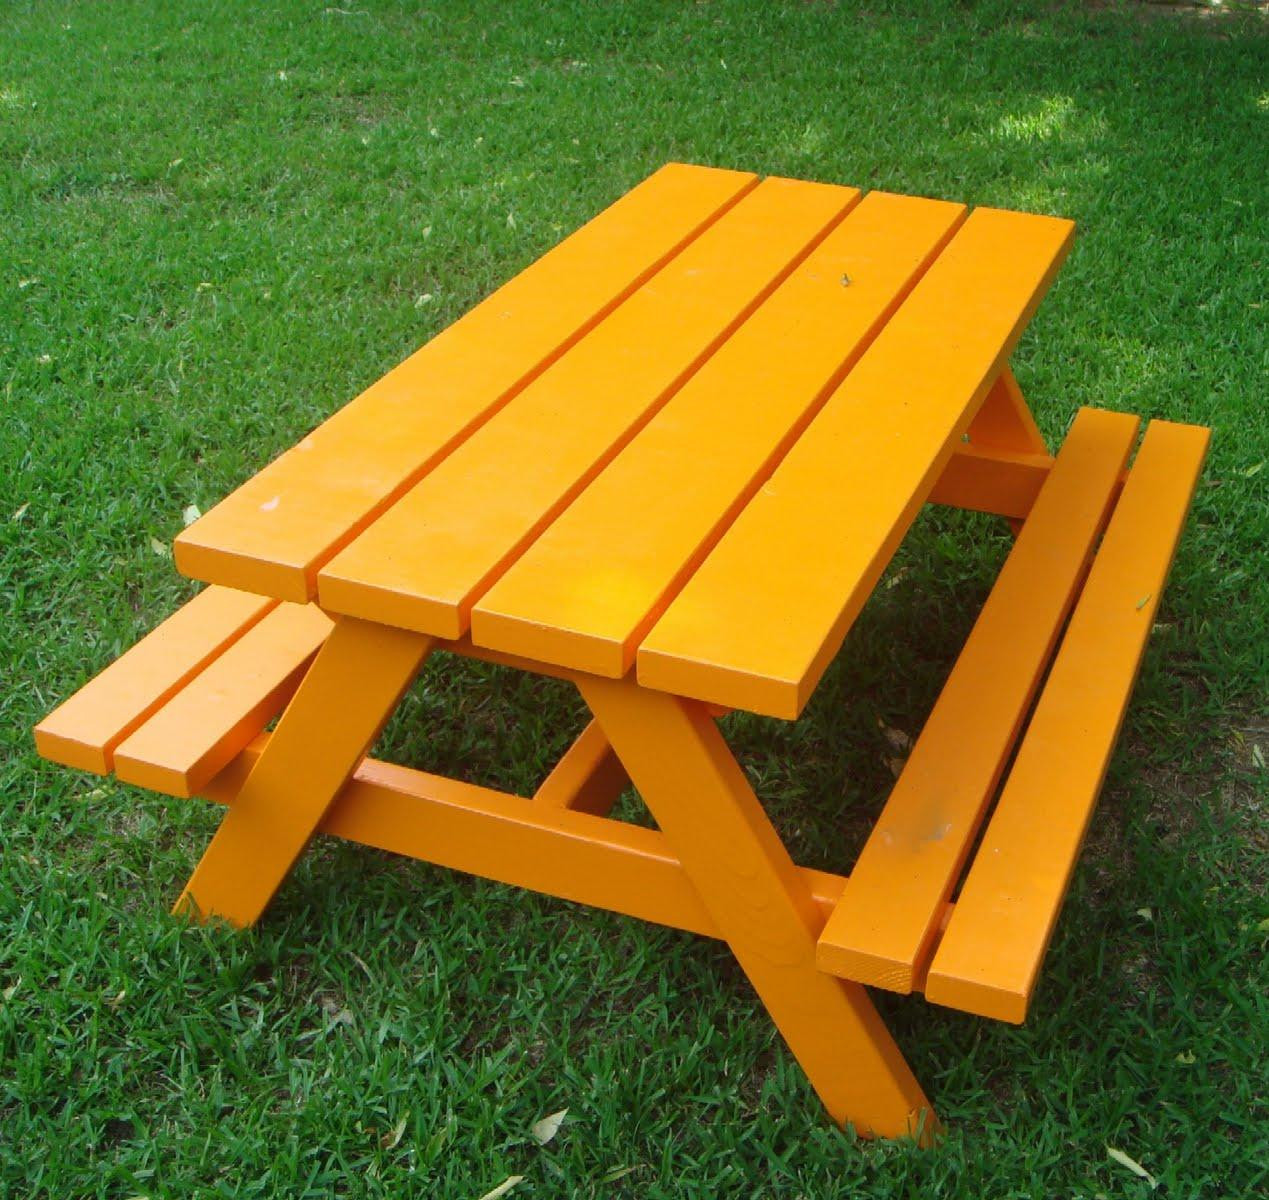 DIY Kids Picnic Table
 21 Things You Can Build With 2x4s